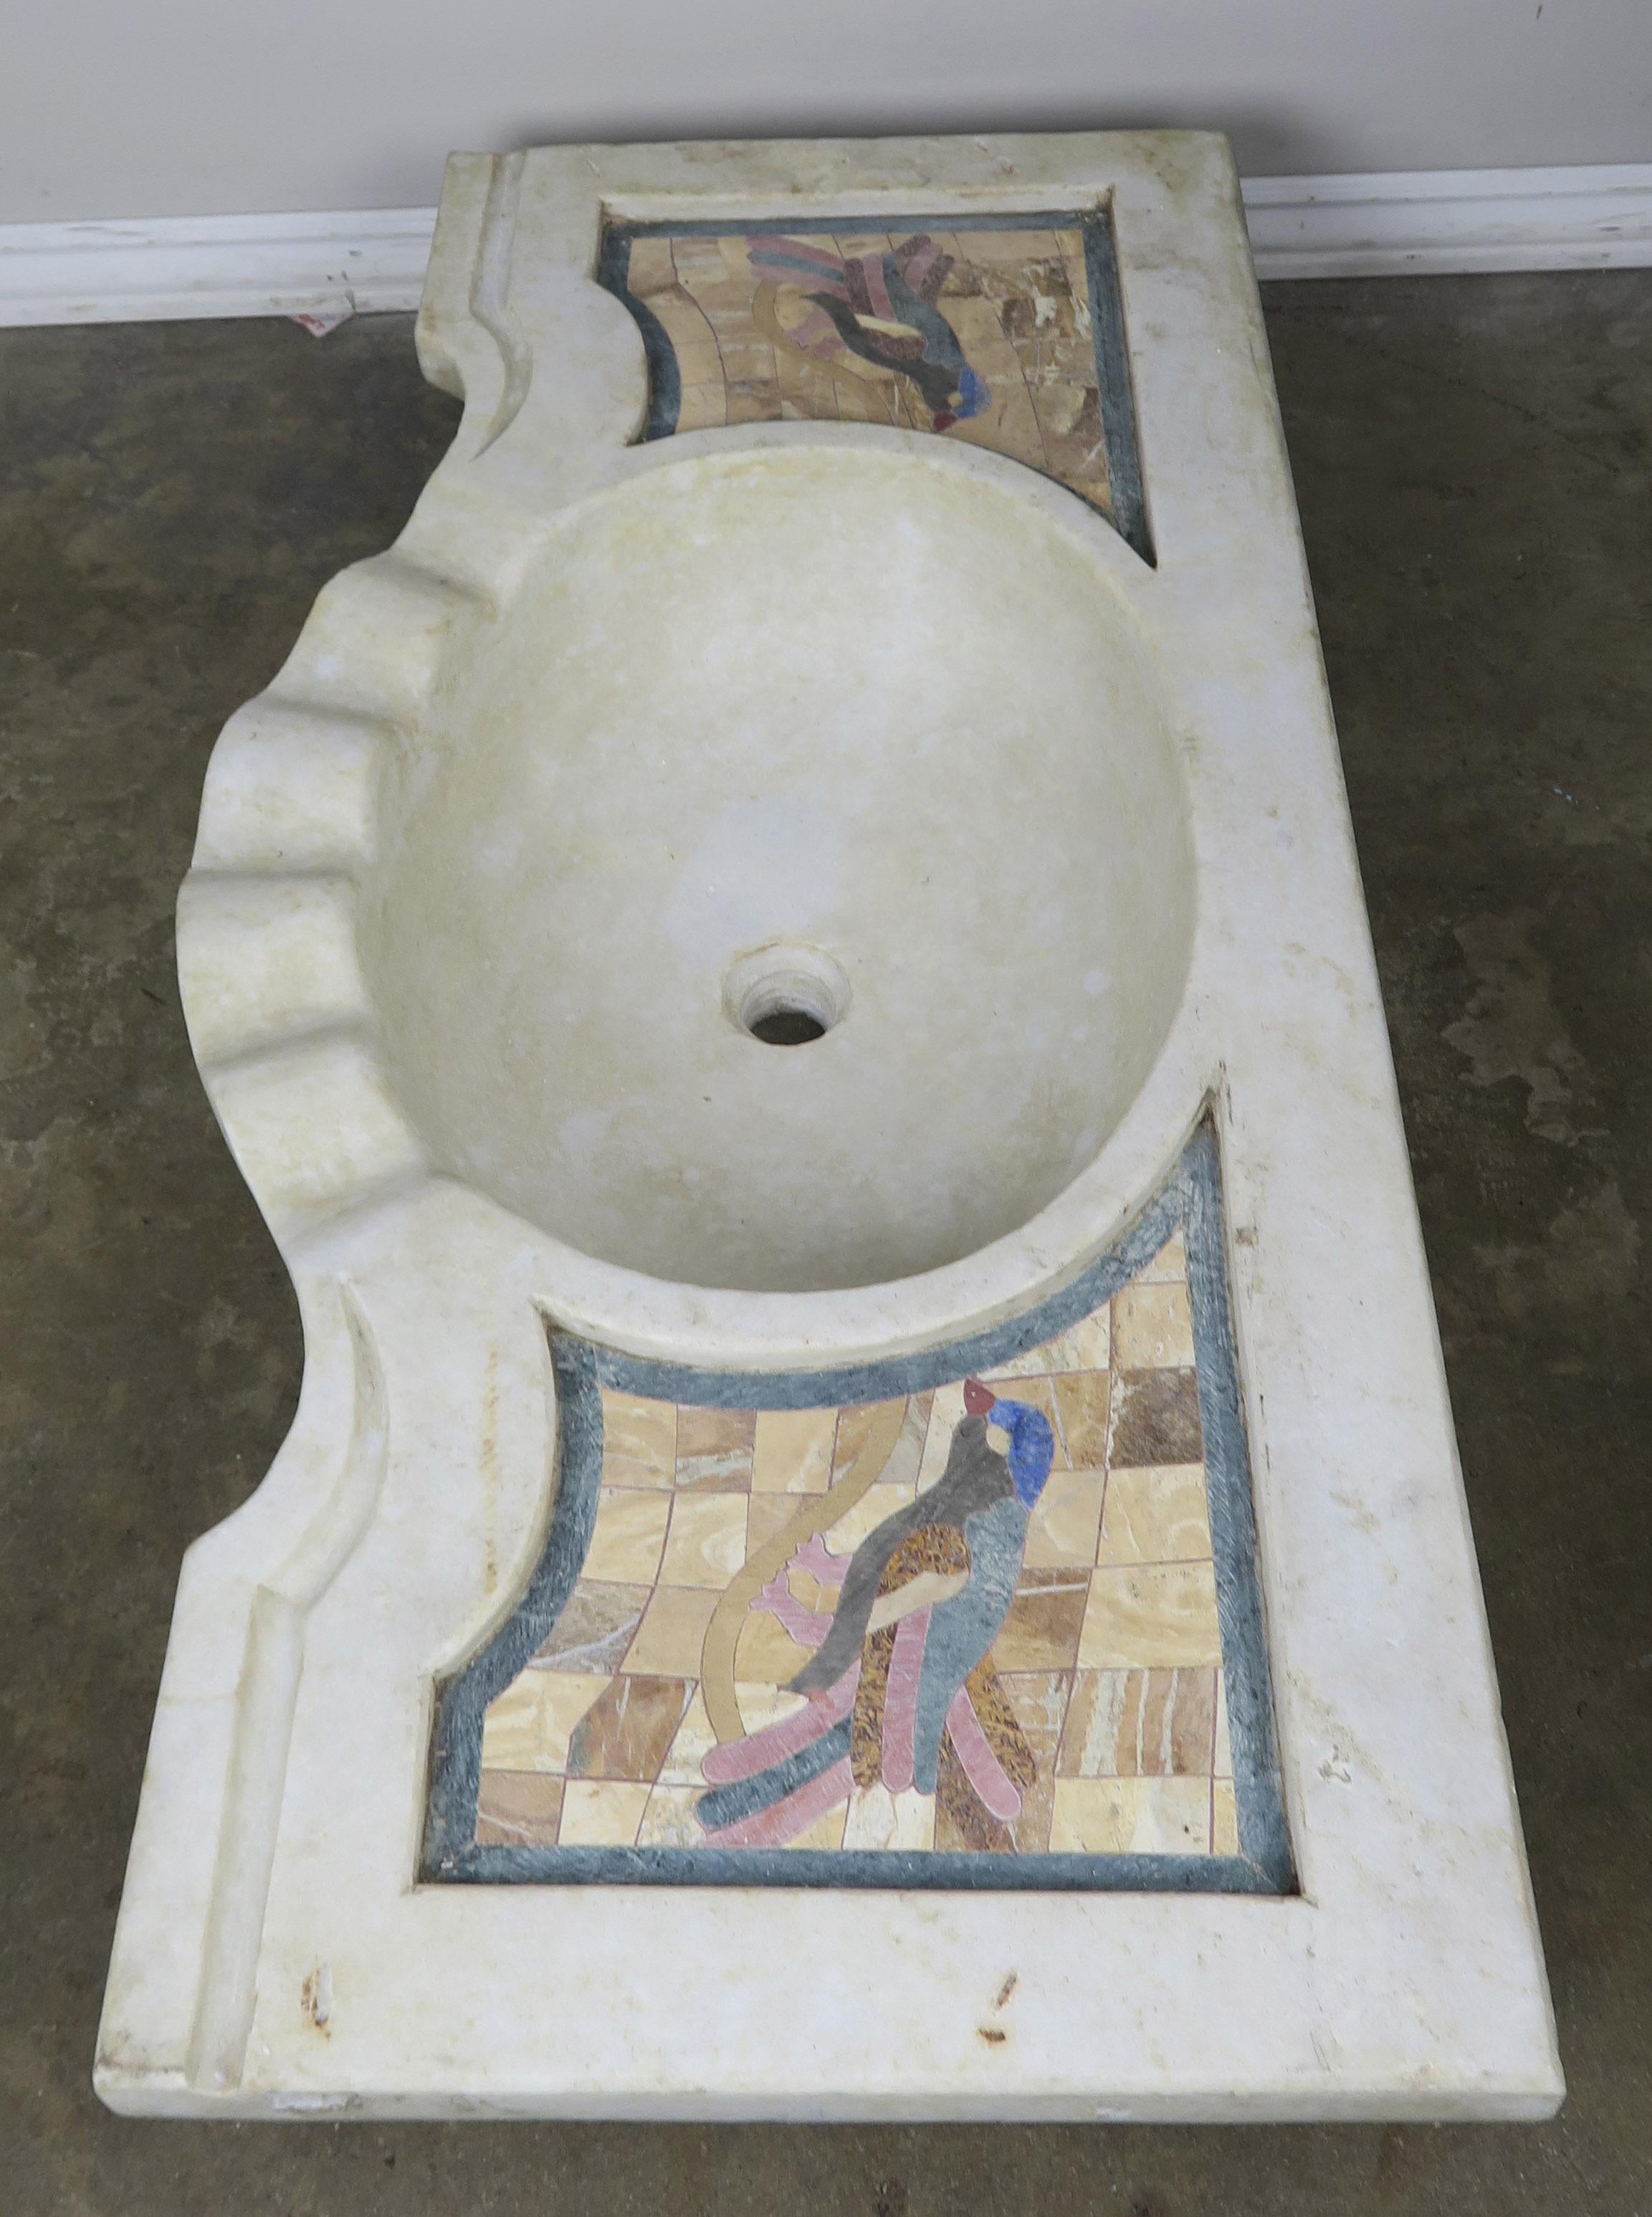 Carrara Marble Sink with Inlaid Stone Birds 1